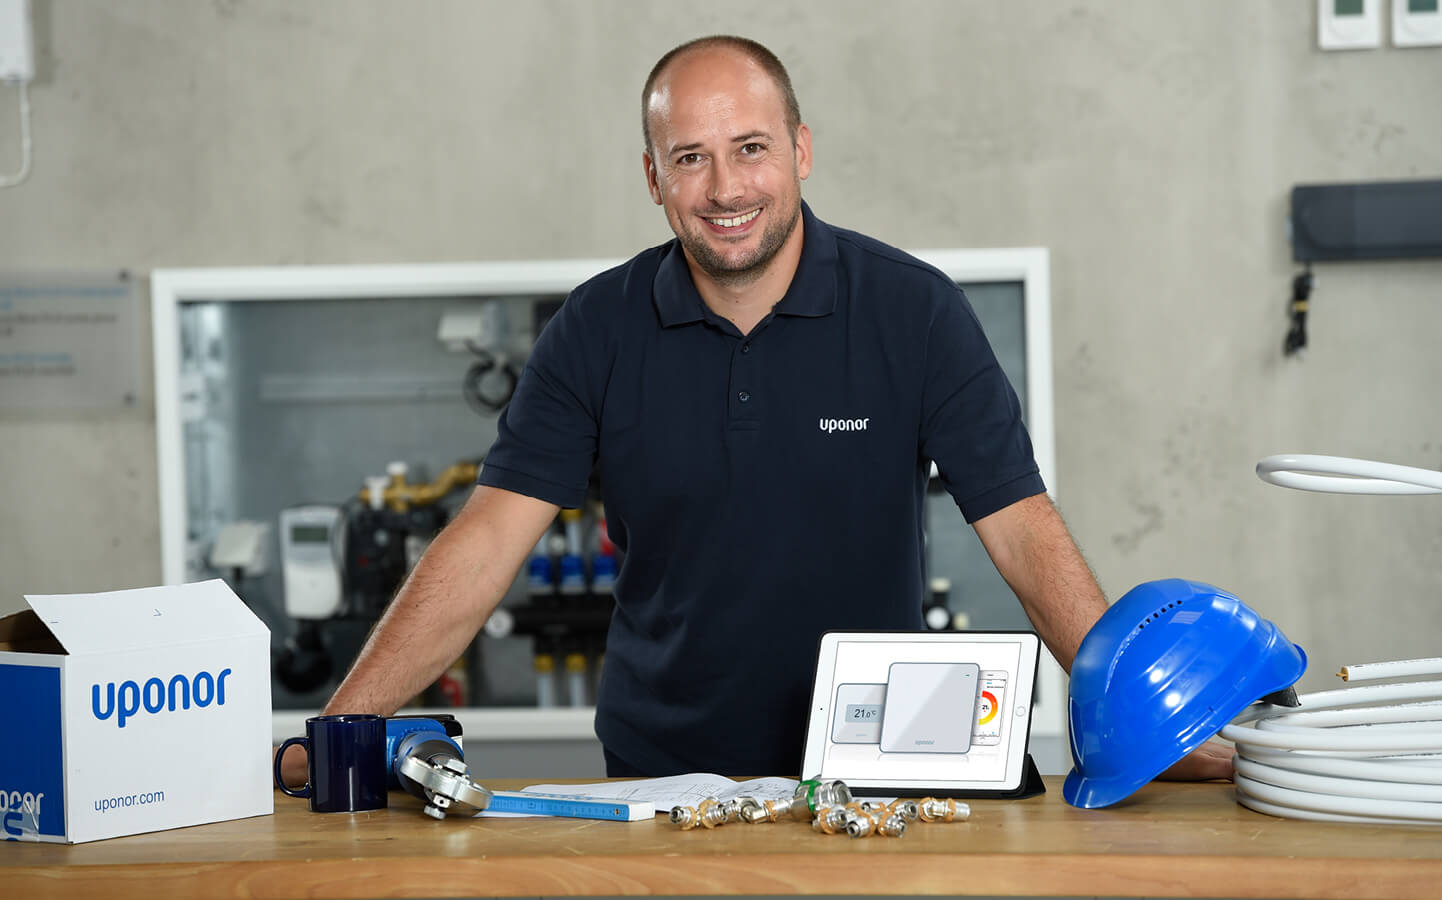 uponor for installers